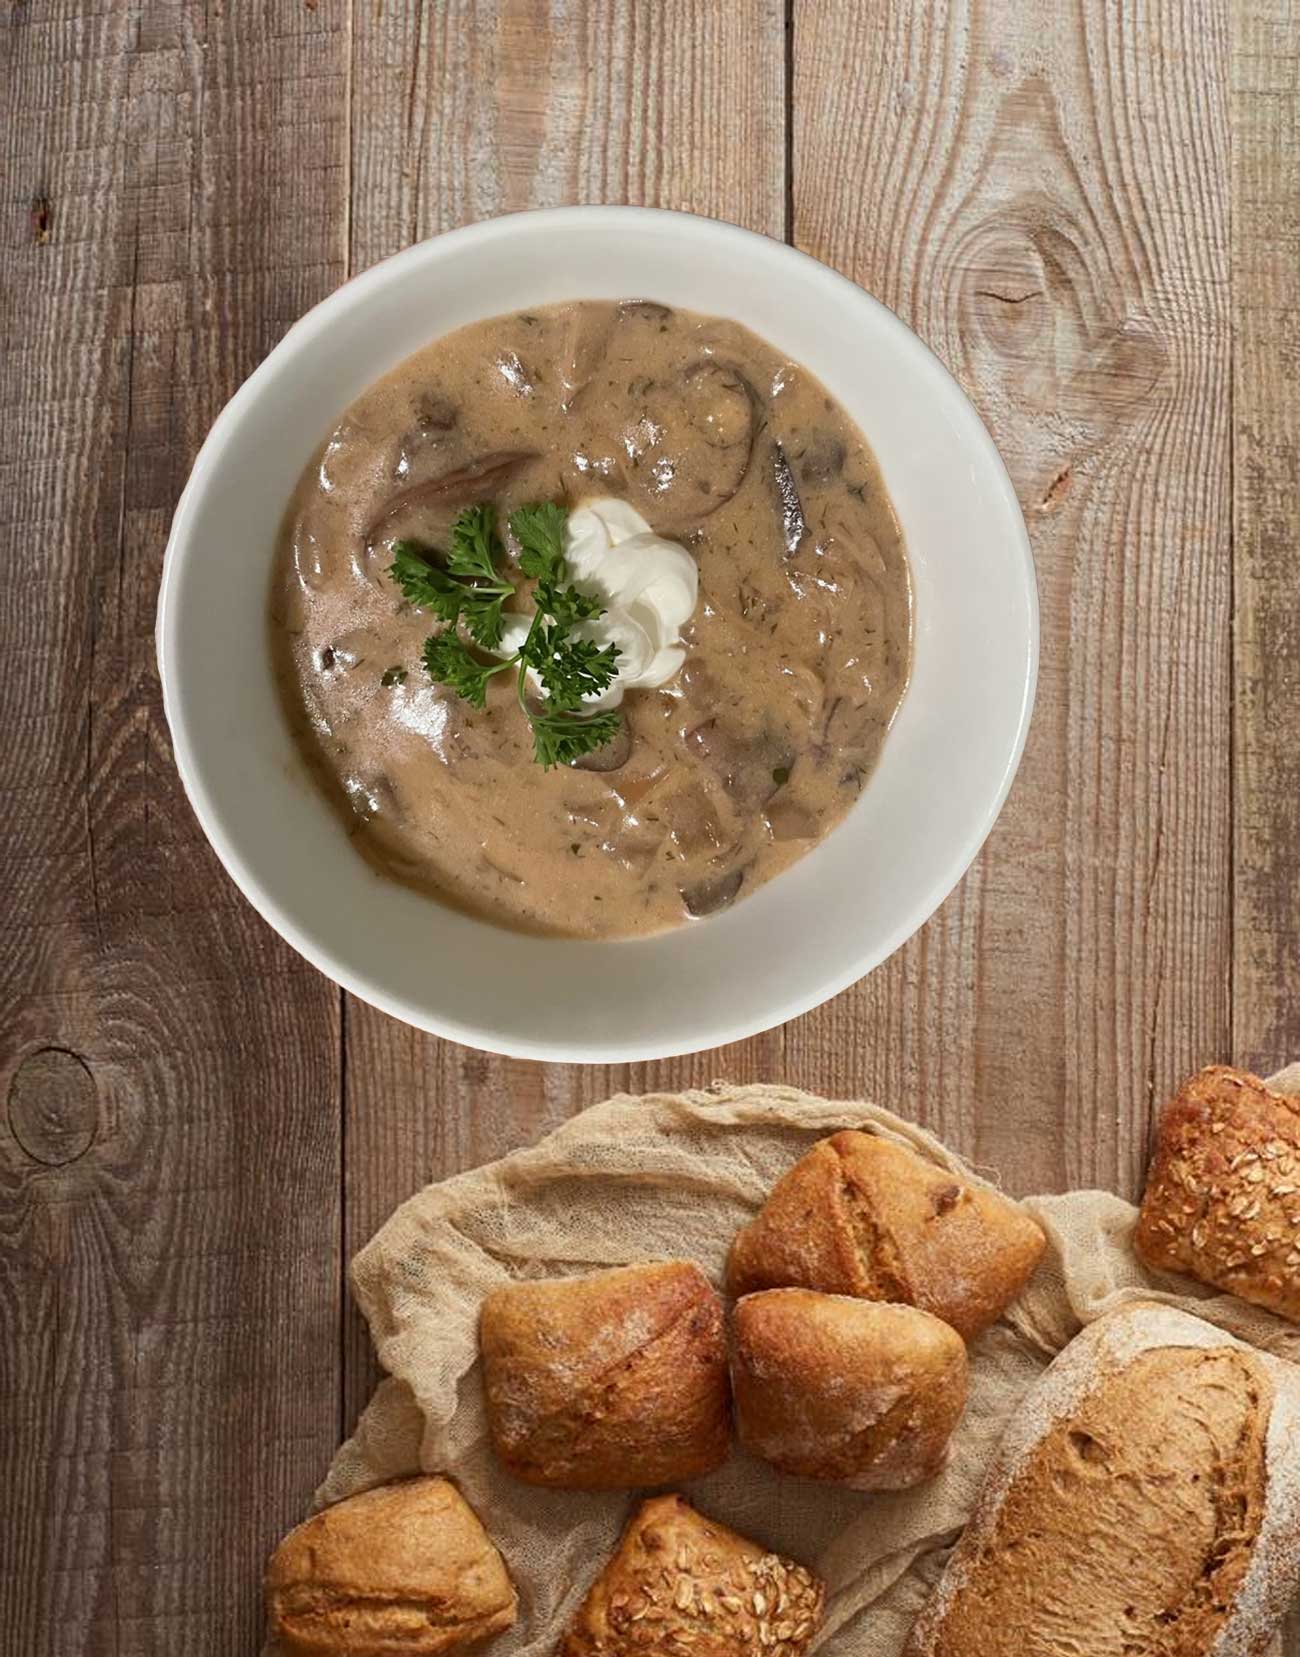 Creamy mushroom and onion soup to end your day